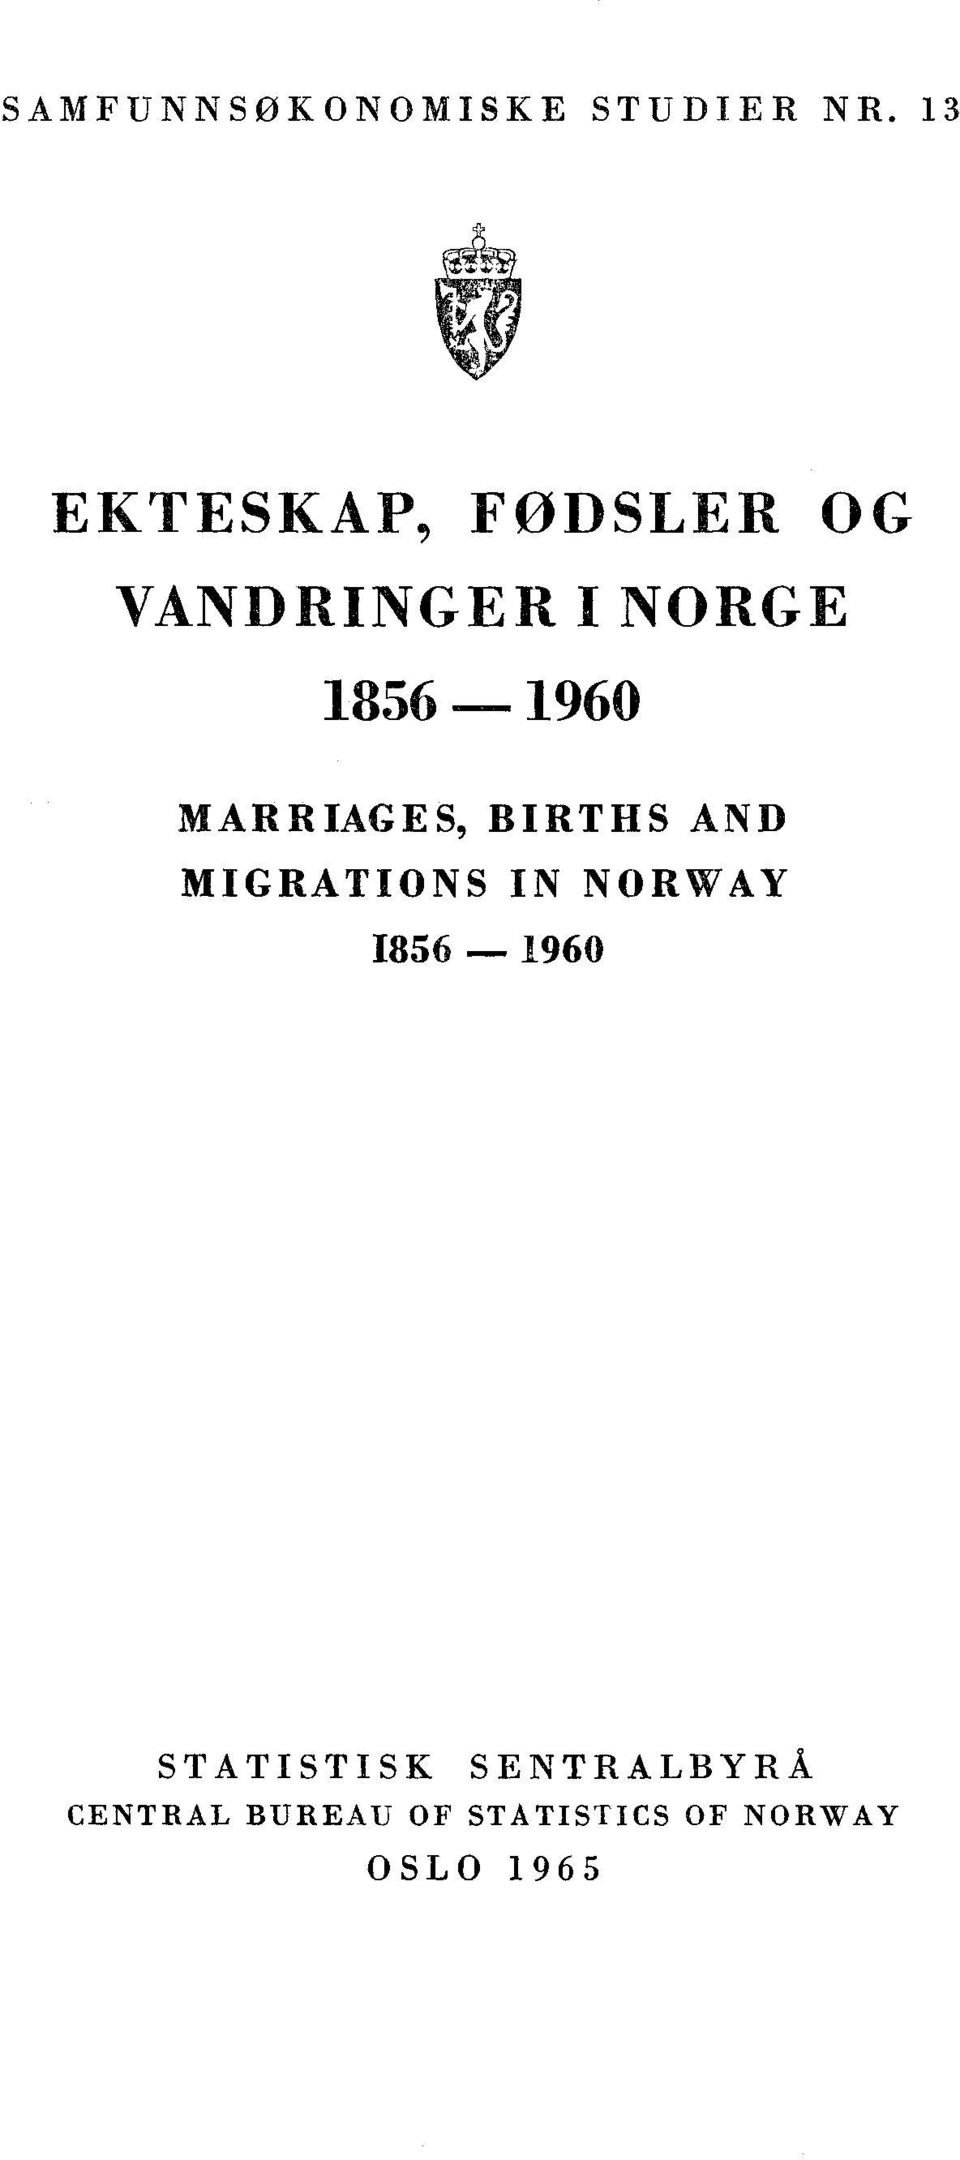 1960 MARRIAGES, BIRTHS AND MIGRATIONS IN NORWAY